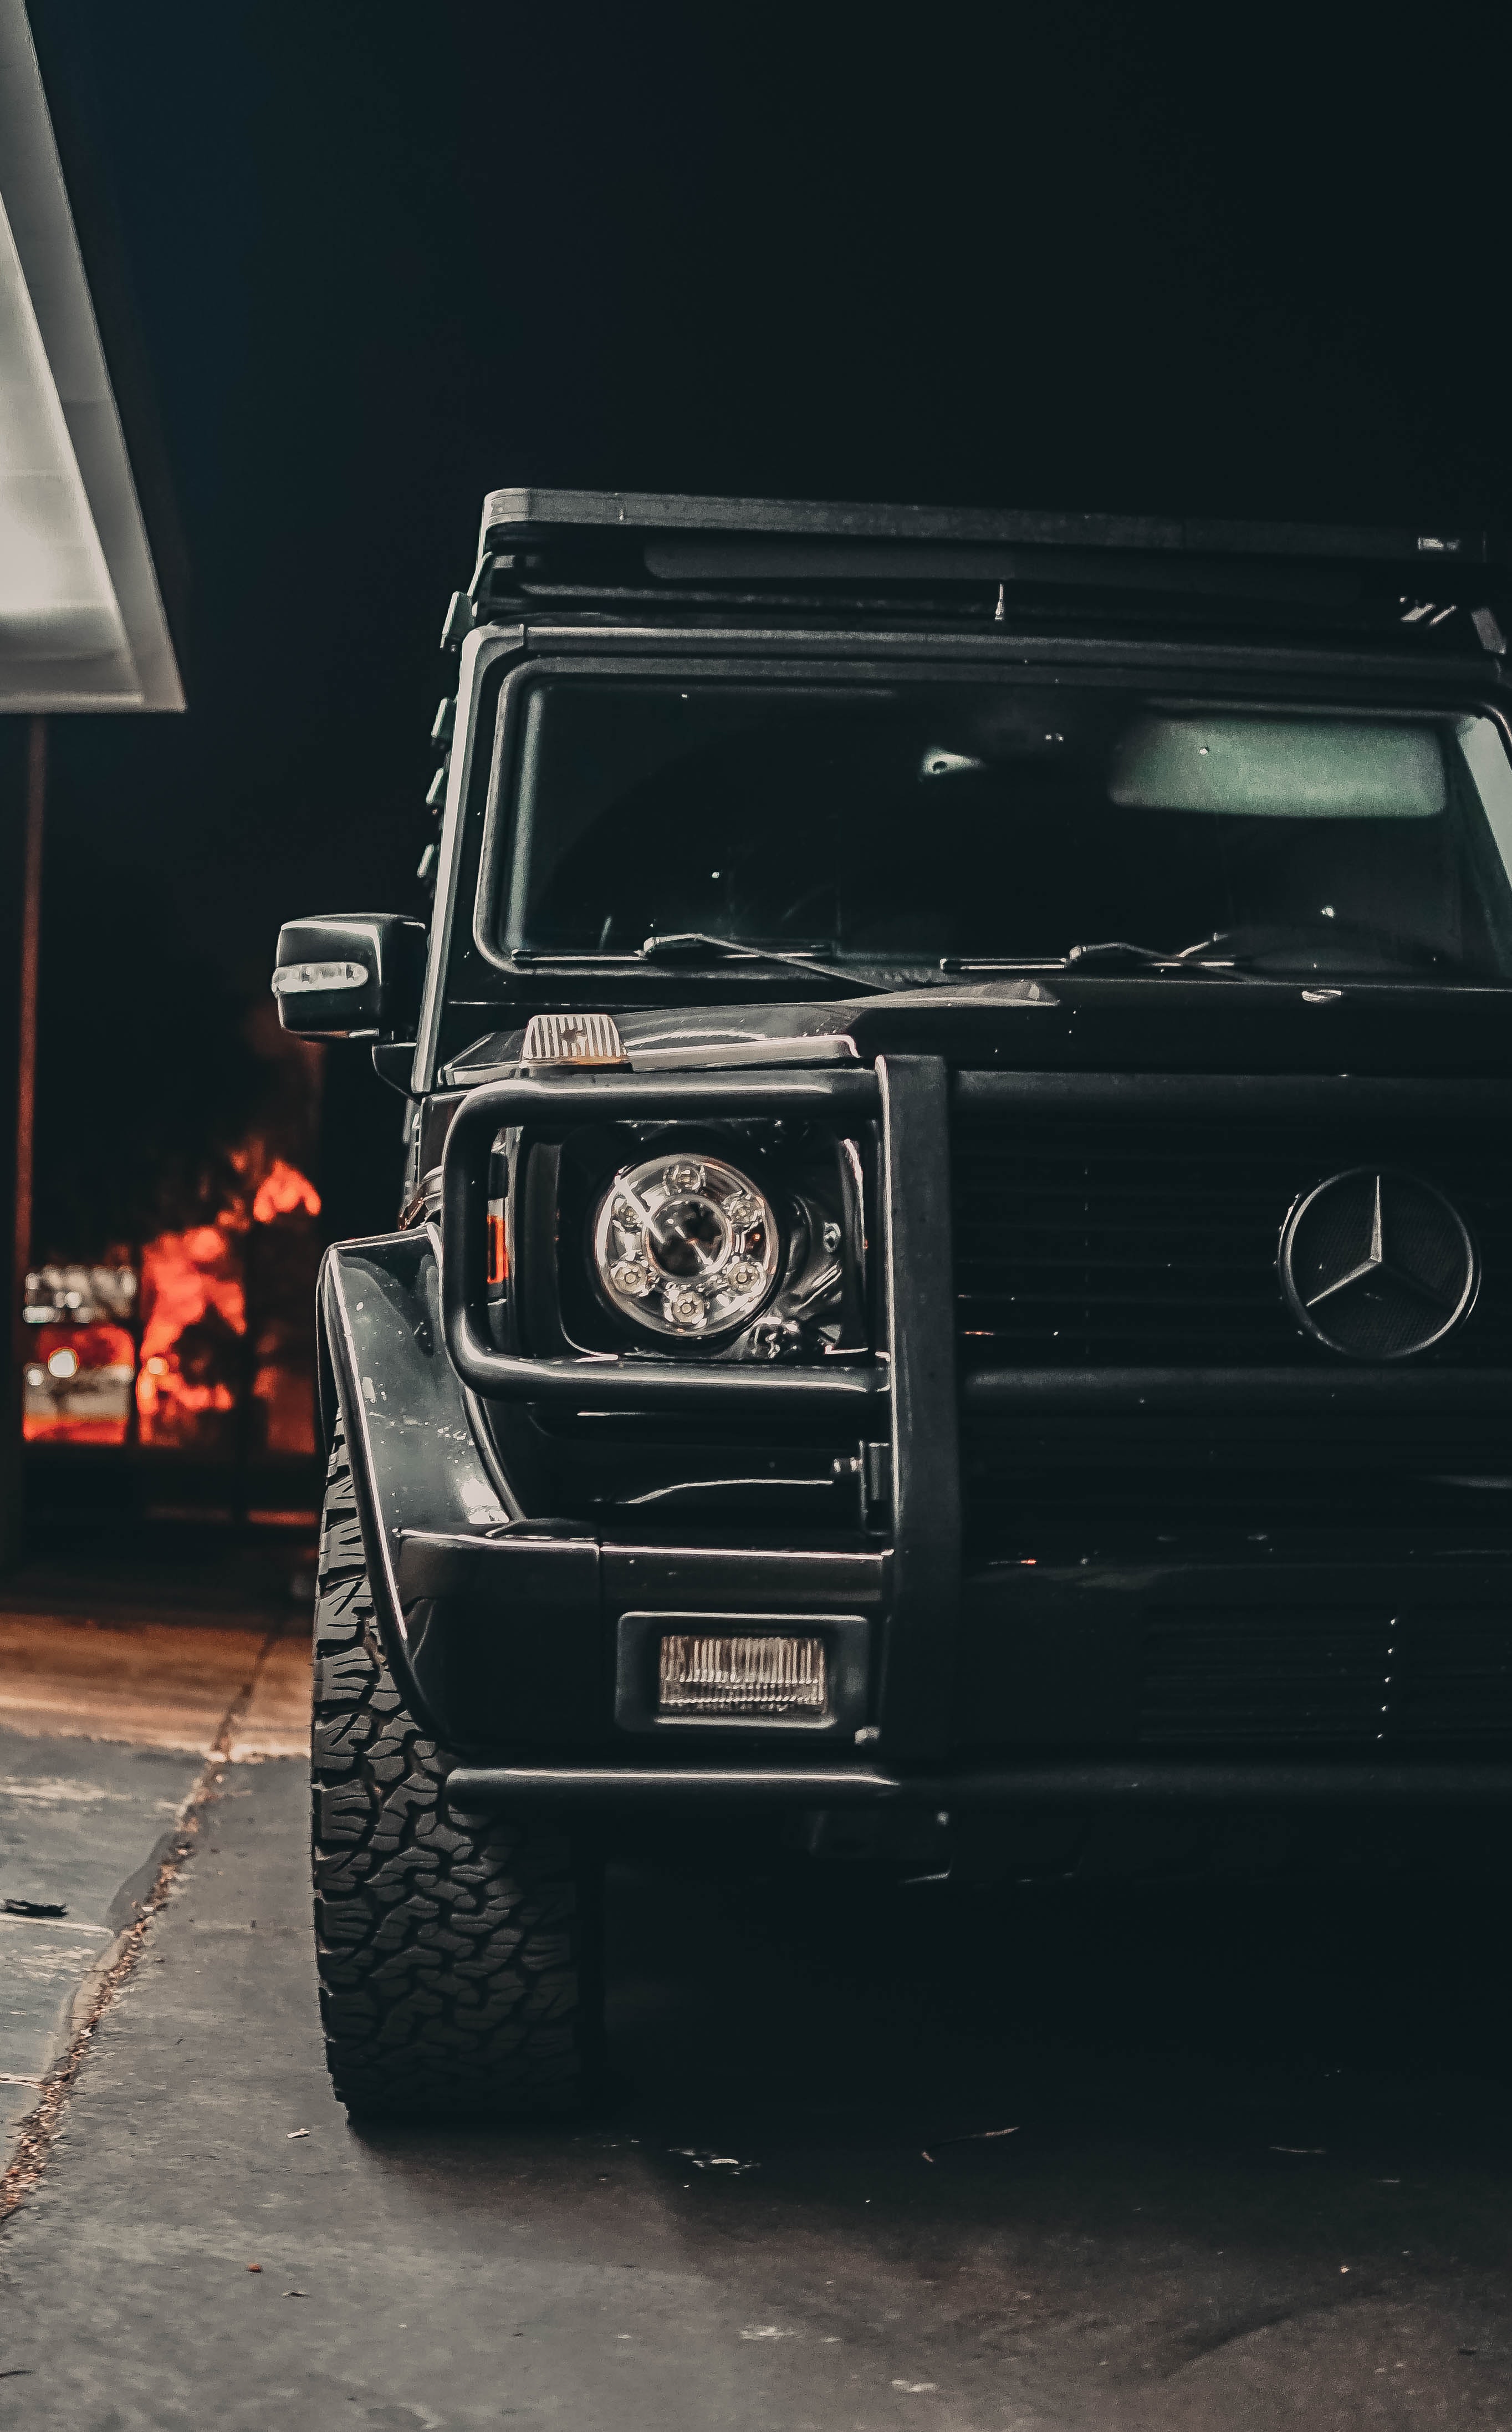 Best Free Mercedes G Wagon & Image · 100% Royalty Free HD Downloads